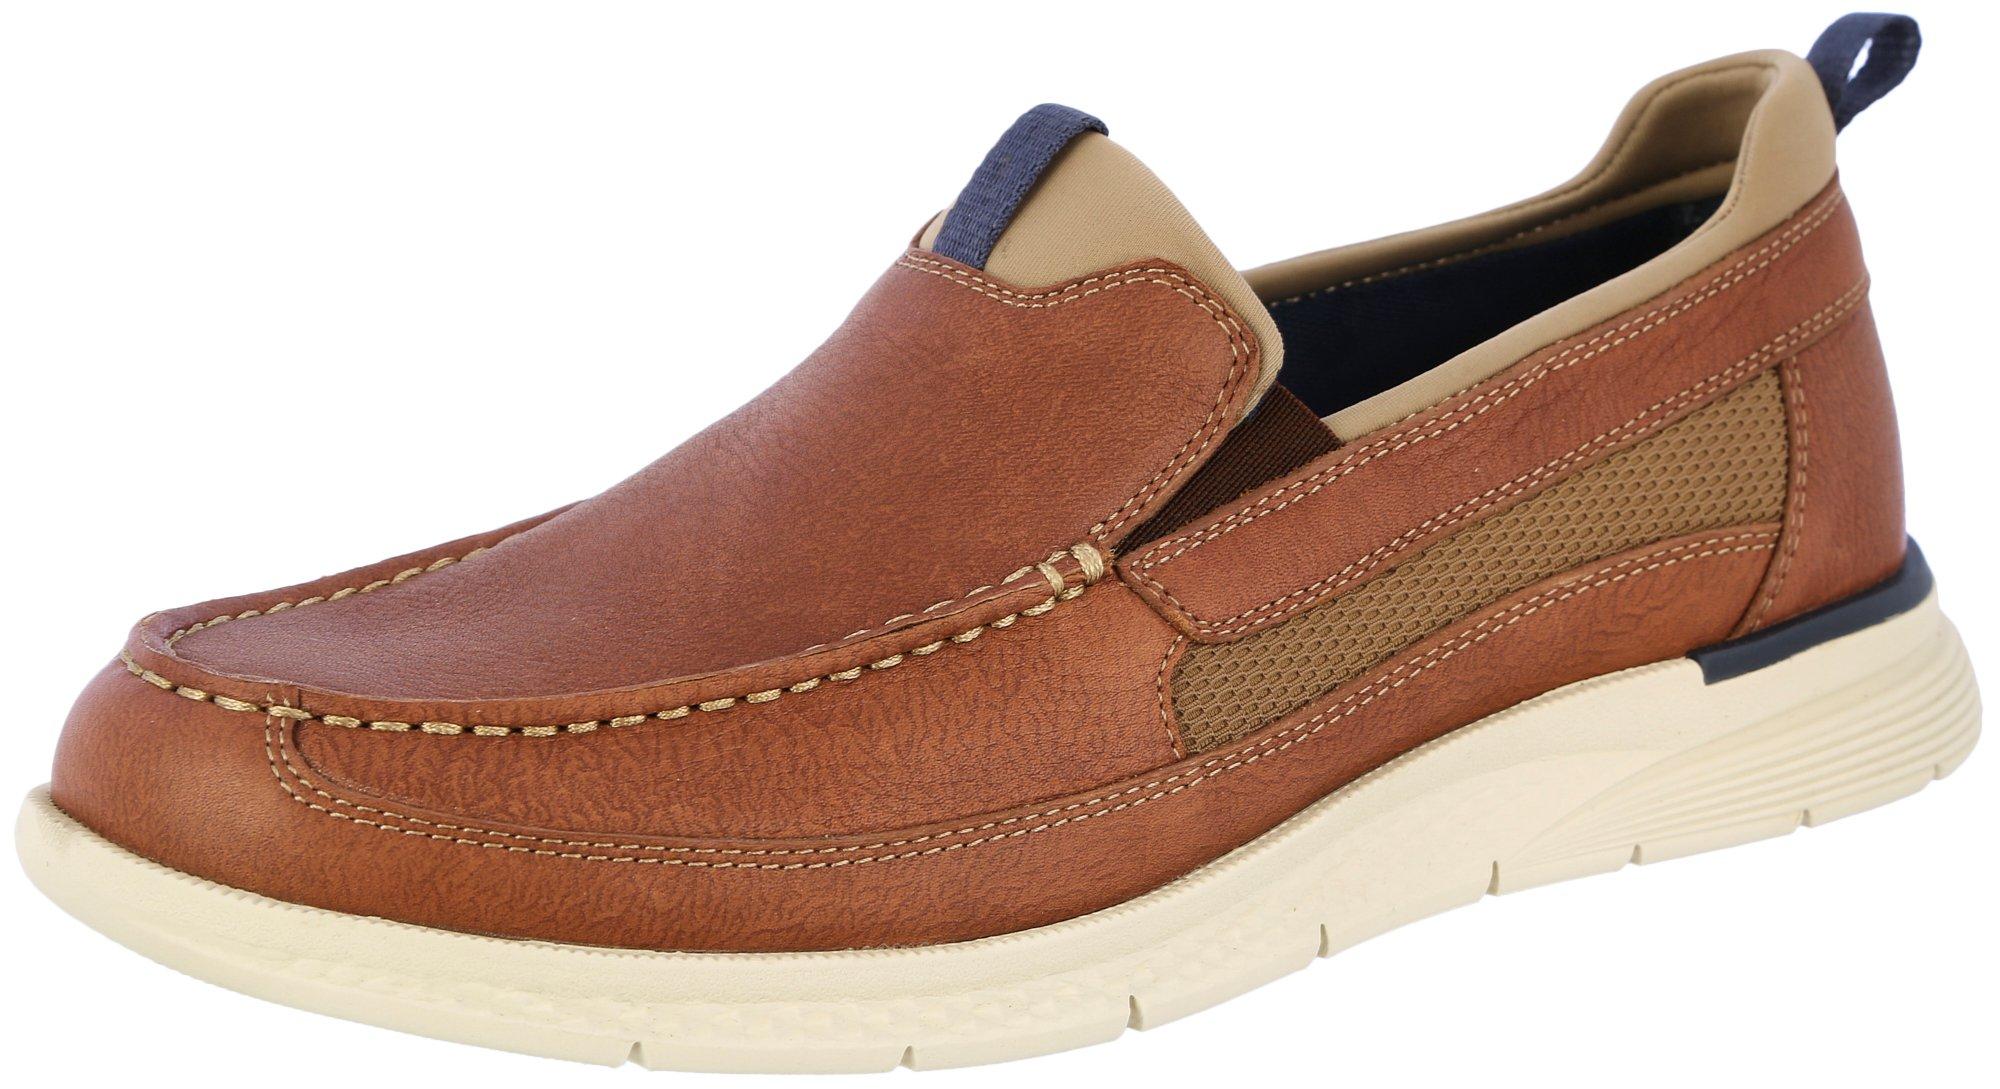  Reel Legends Mens Outrigger Casual Sports Boat Shoes Tan